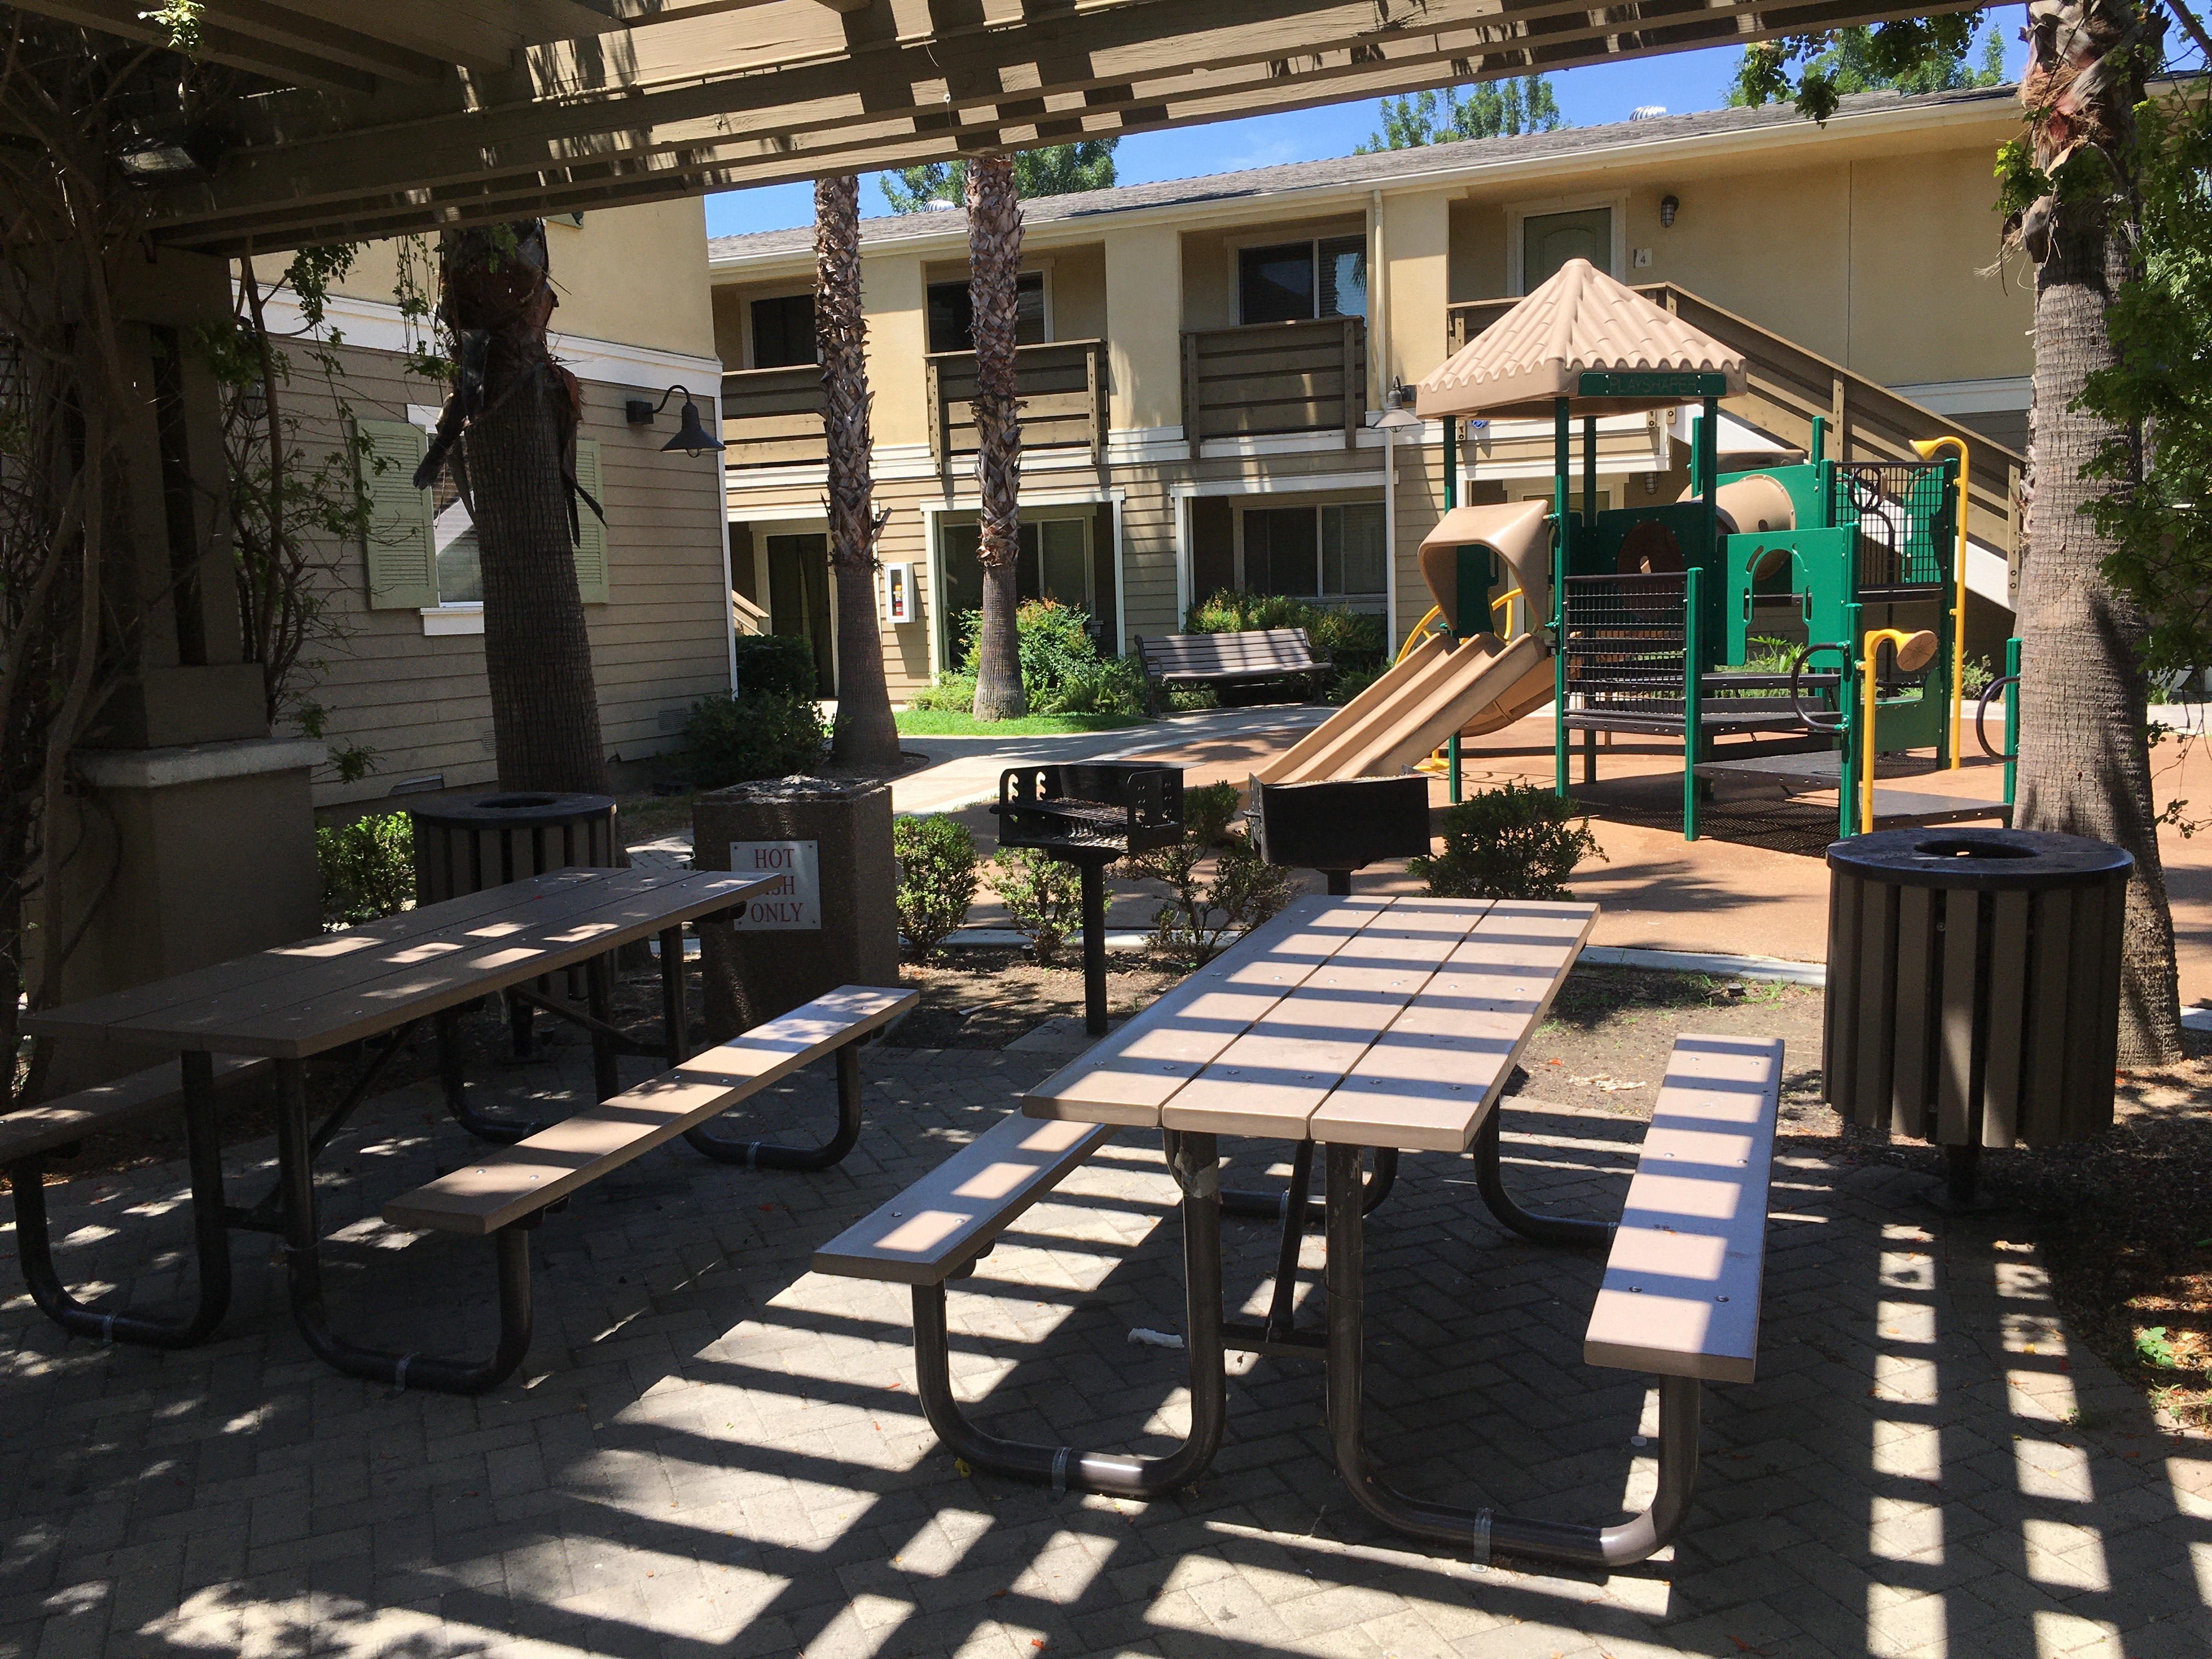 View of a Bar BQ area, two picnic tables with benches, playground.